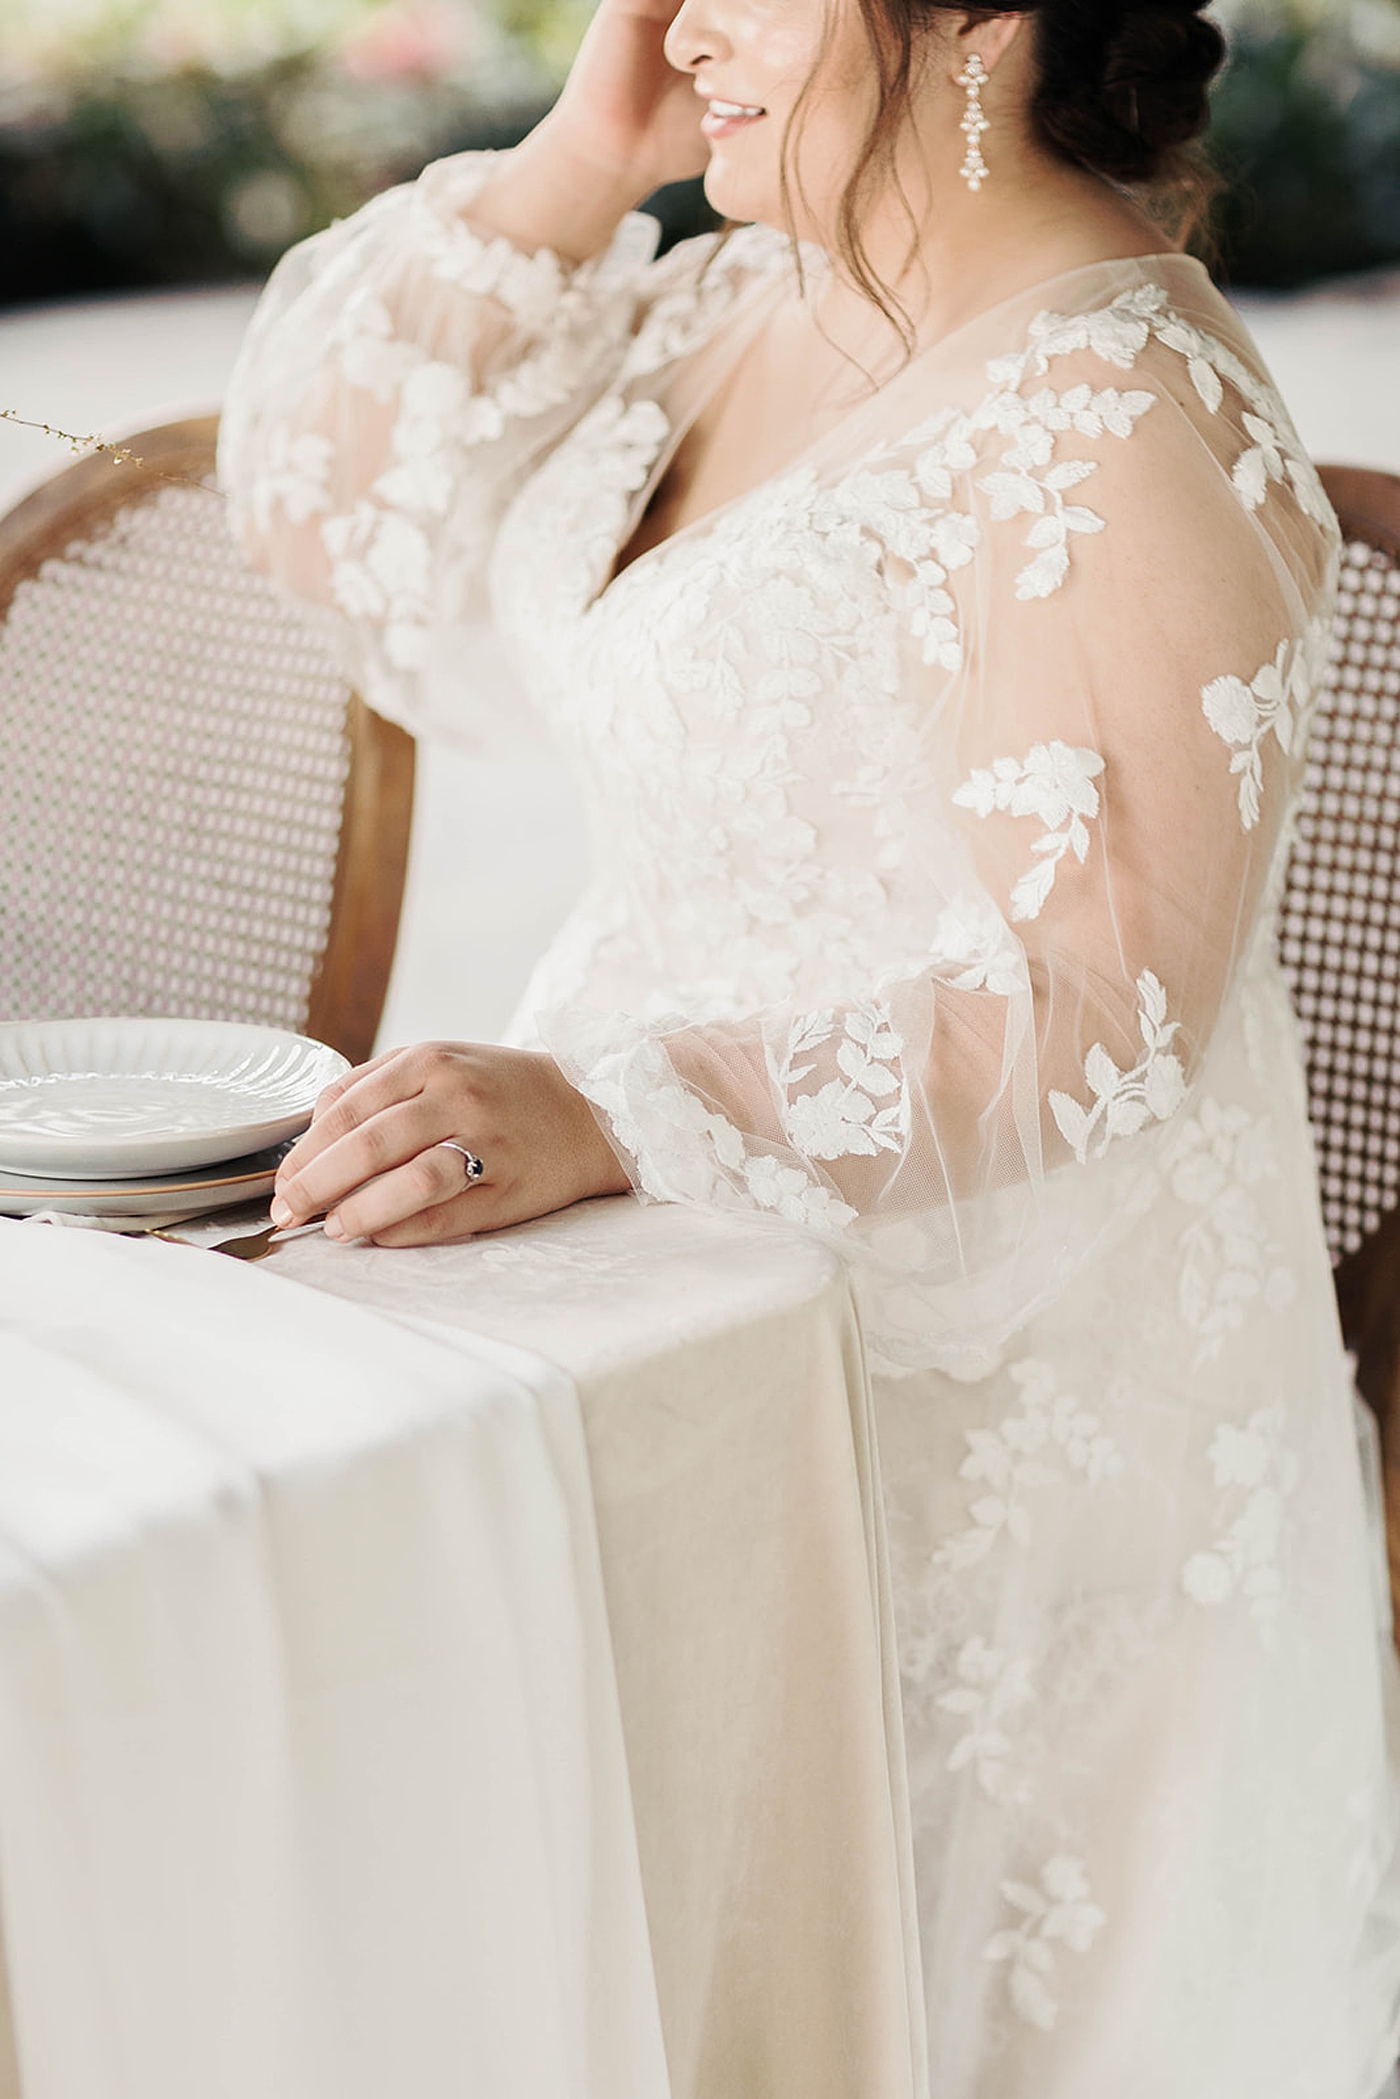 Bride in a lace gown sitting at a table | Romantic French Countryside Editorial by Carters Event Co